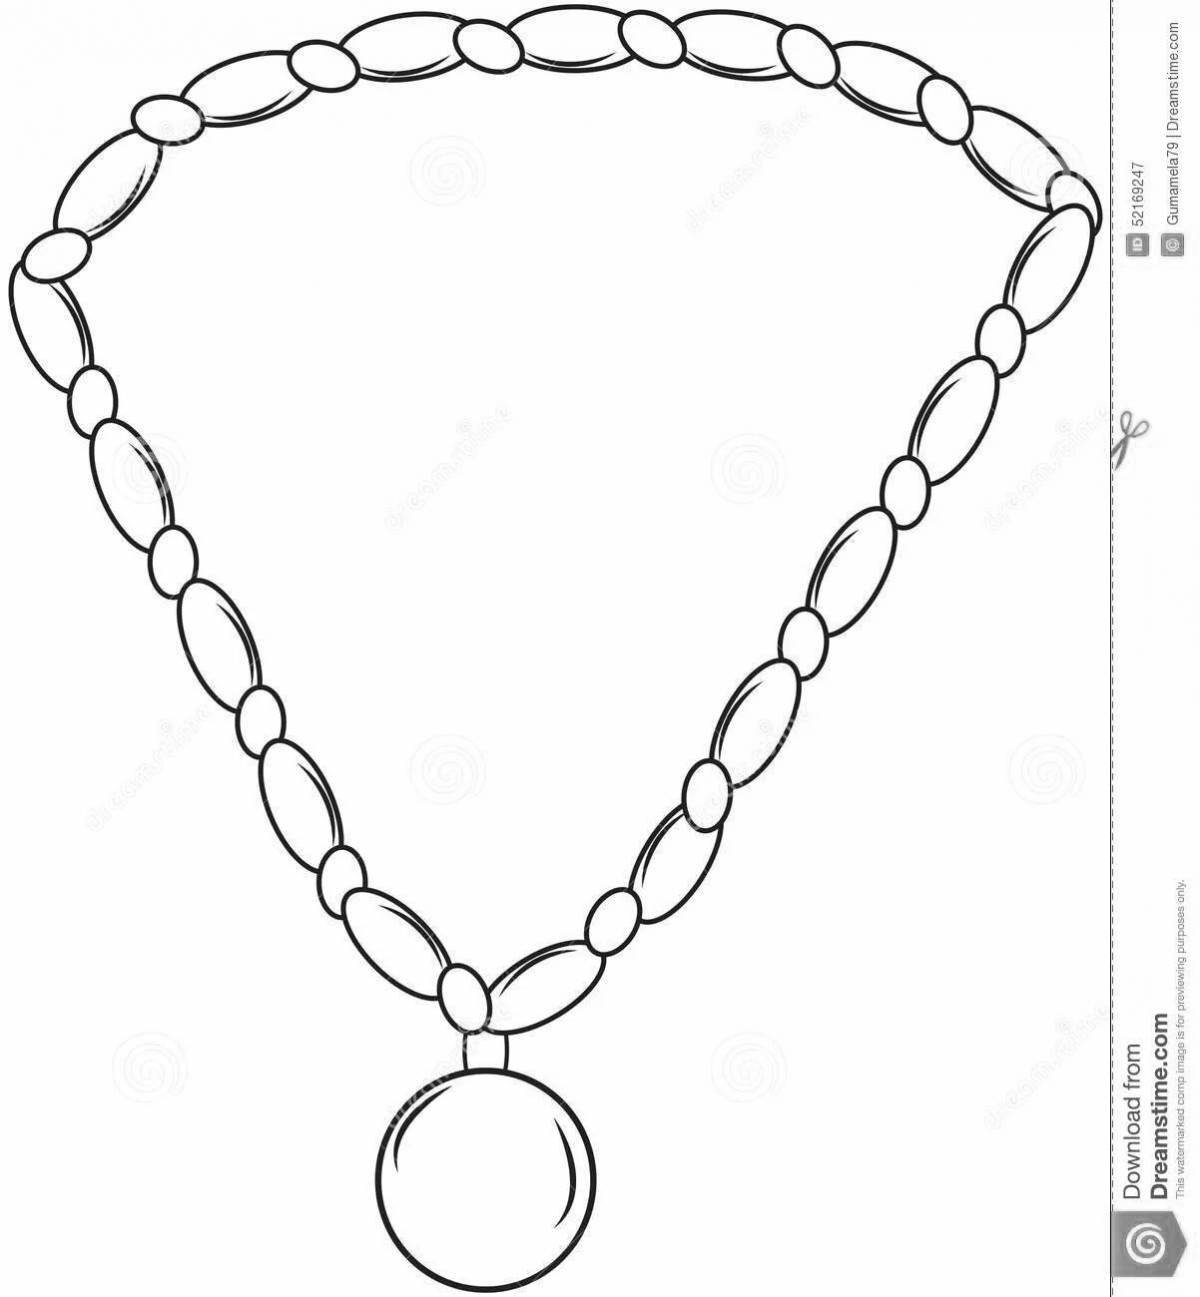 Inspirational chain coloring page